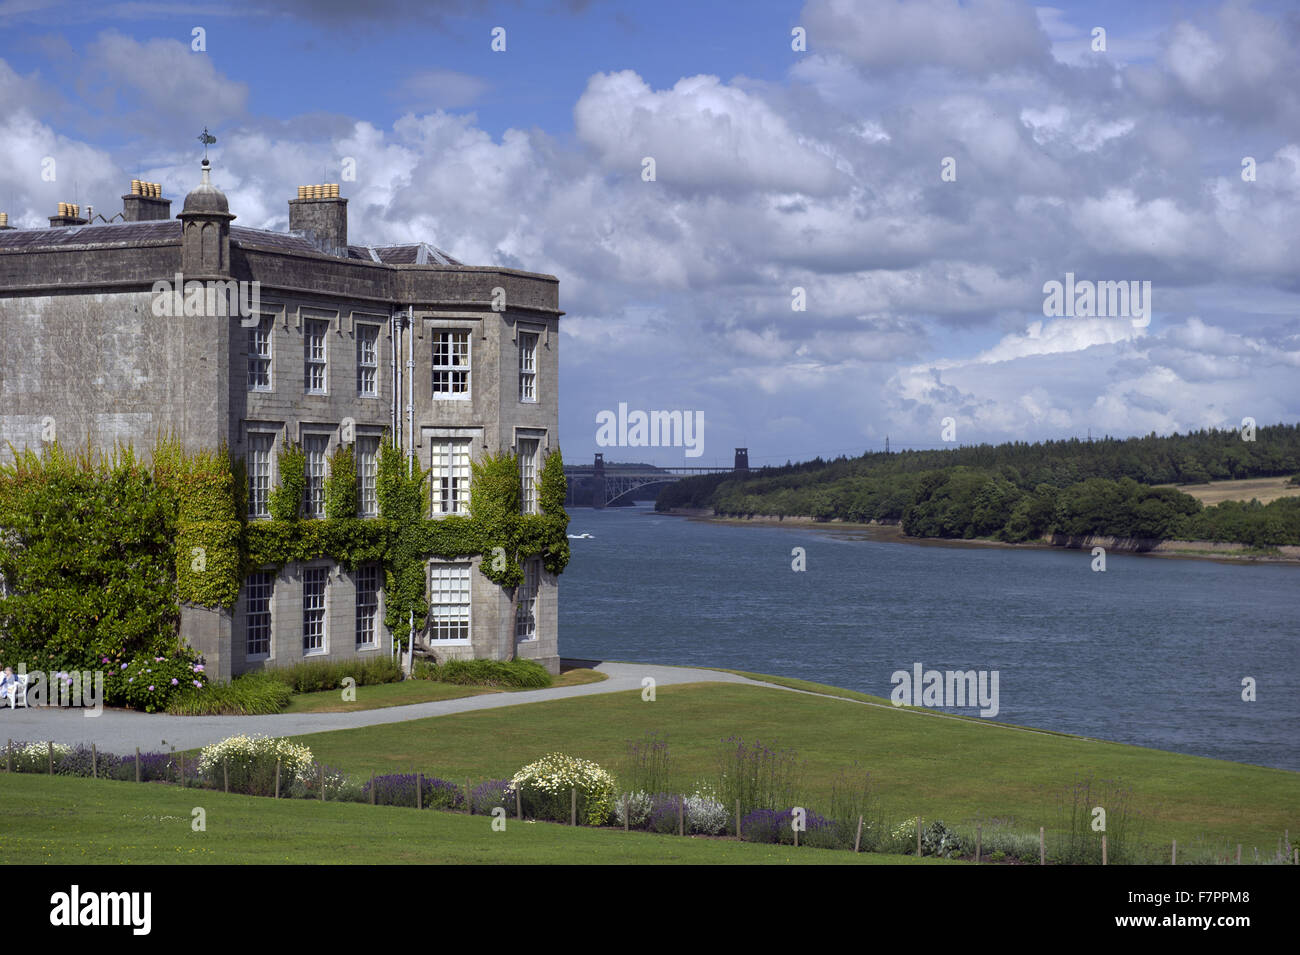 View of the exterior of the house at Plas Newydd Country House and Gardens, Anglesey, Wales. This fine 18th century mansion sits on the shores of the Menai Strait, with breathtaking views of Snowdonia. Stock Photo